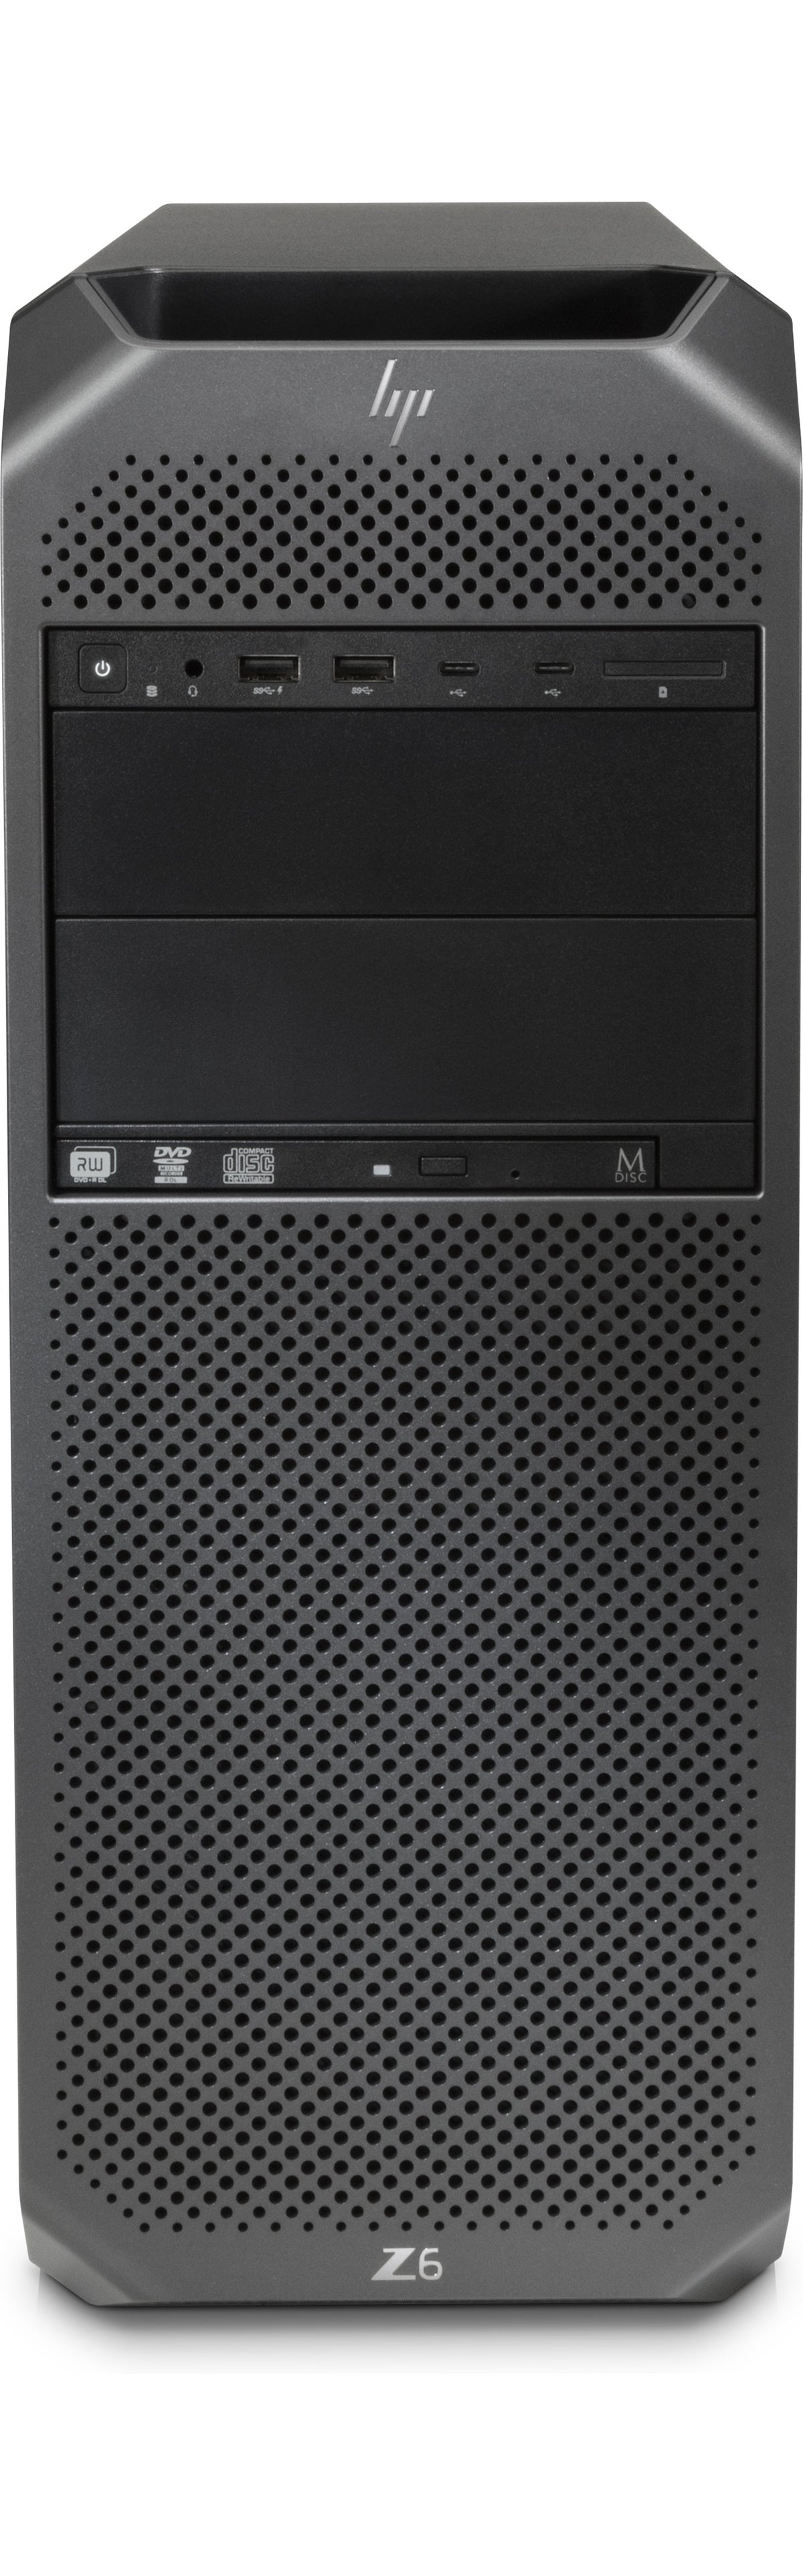 HP Workstation Z6 G4 - Tower - 4U - 1 x Xeon Silver 4108 / 1.8 GHz - vPro - RAM 32 GB - HDD 1 TB - DVD Writer - no image controller - GigE - Win 10 Pro for 64-bit workstations - monitor : none - black